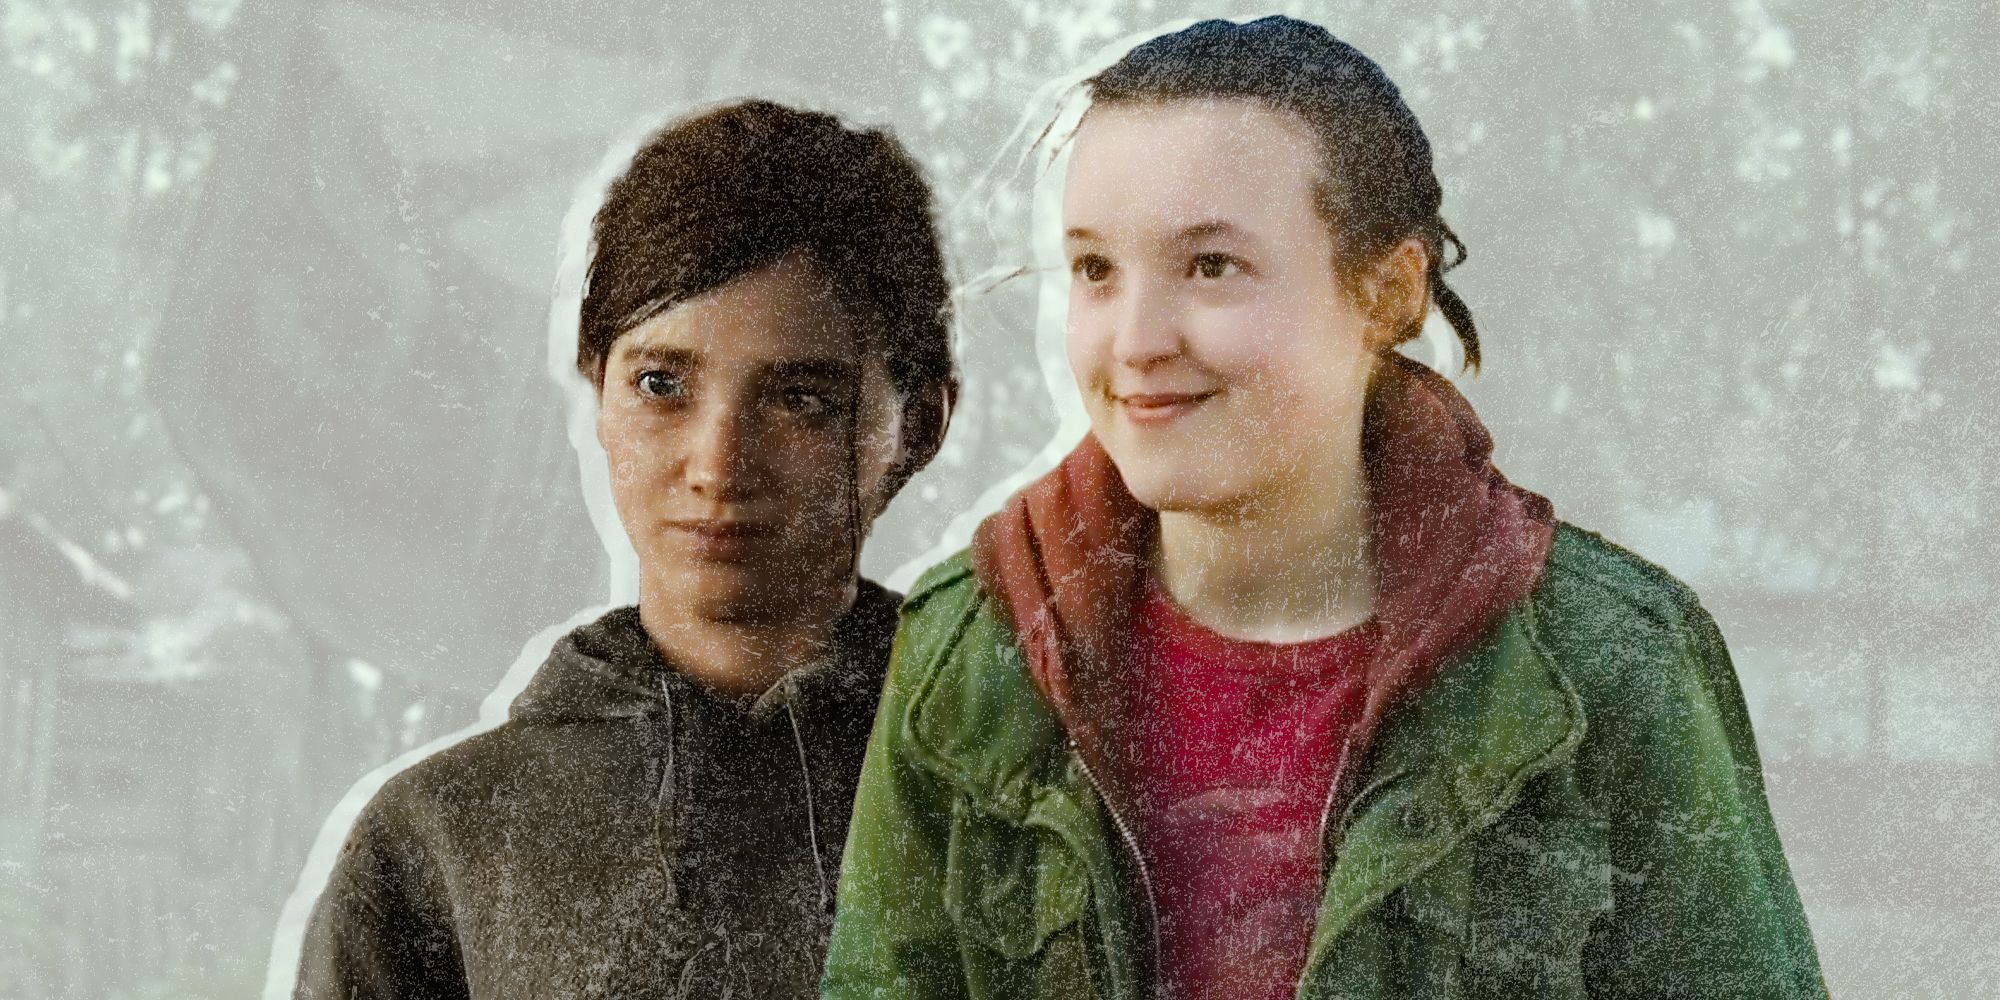 The Last Of Us Doesn't Need To Recast Bella Ramsey